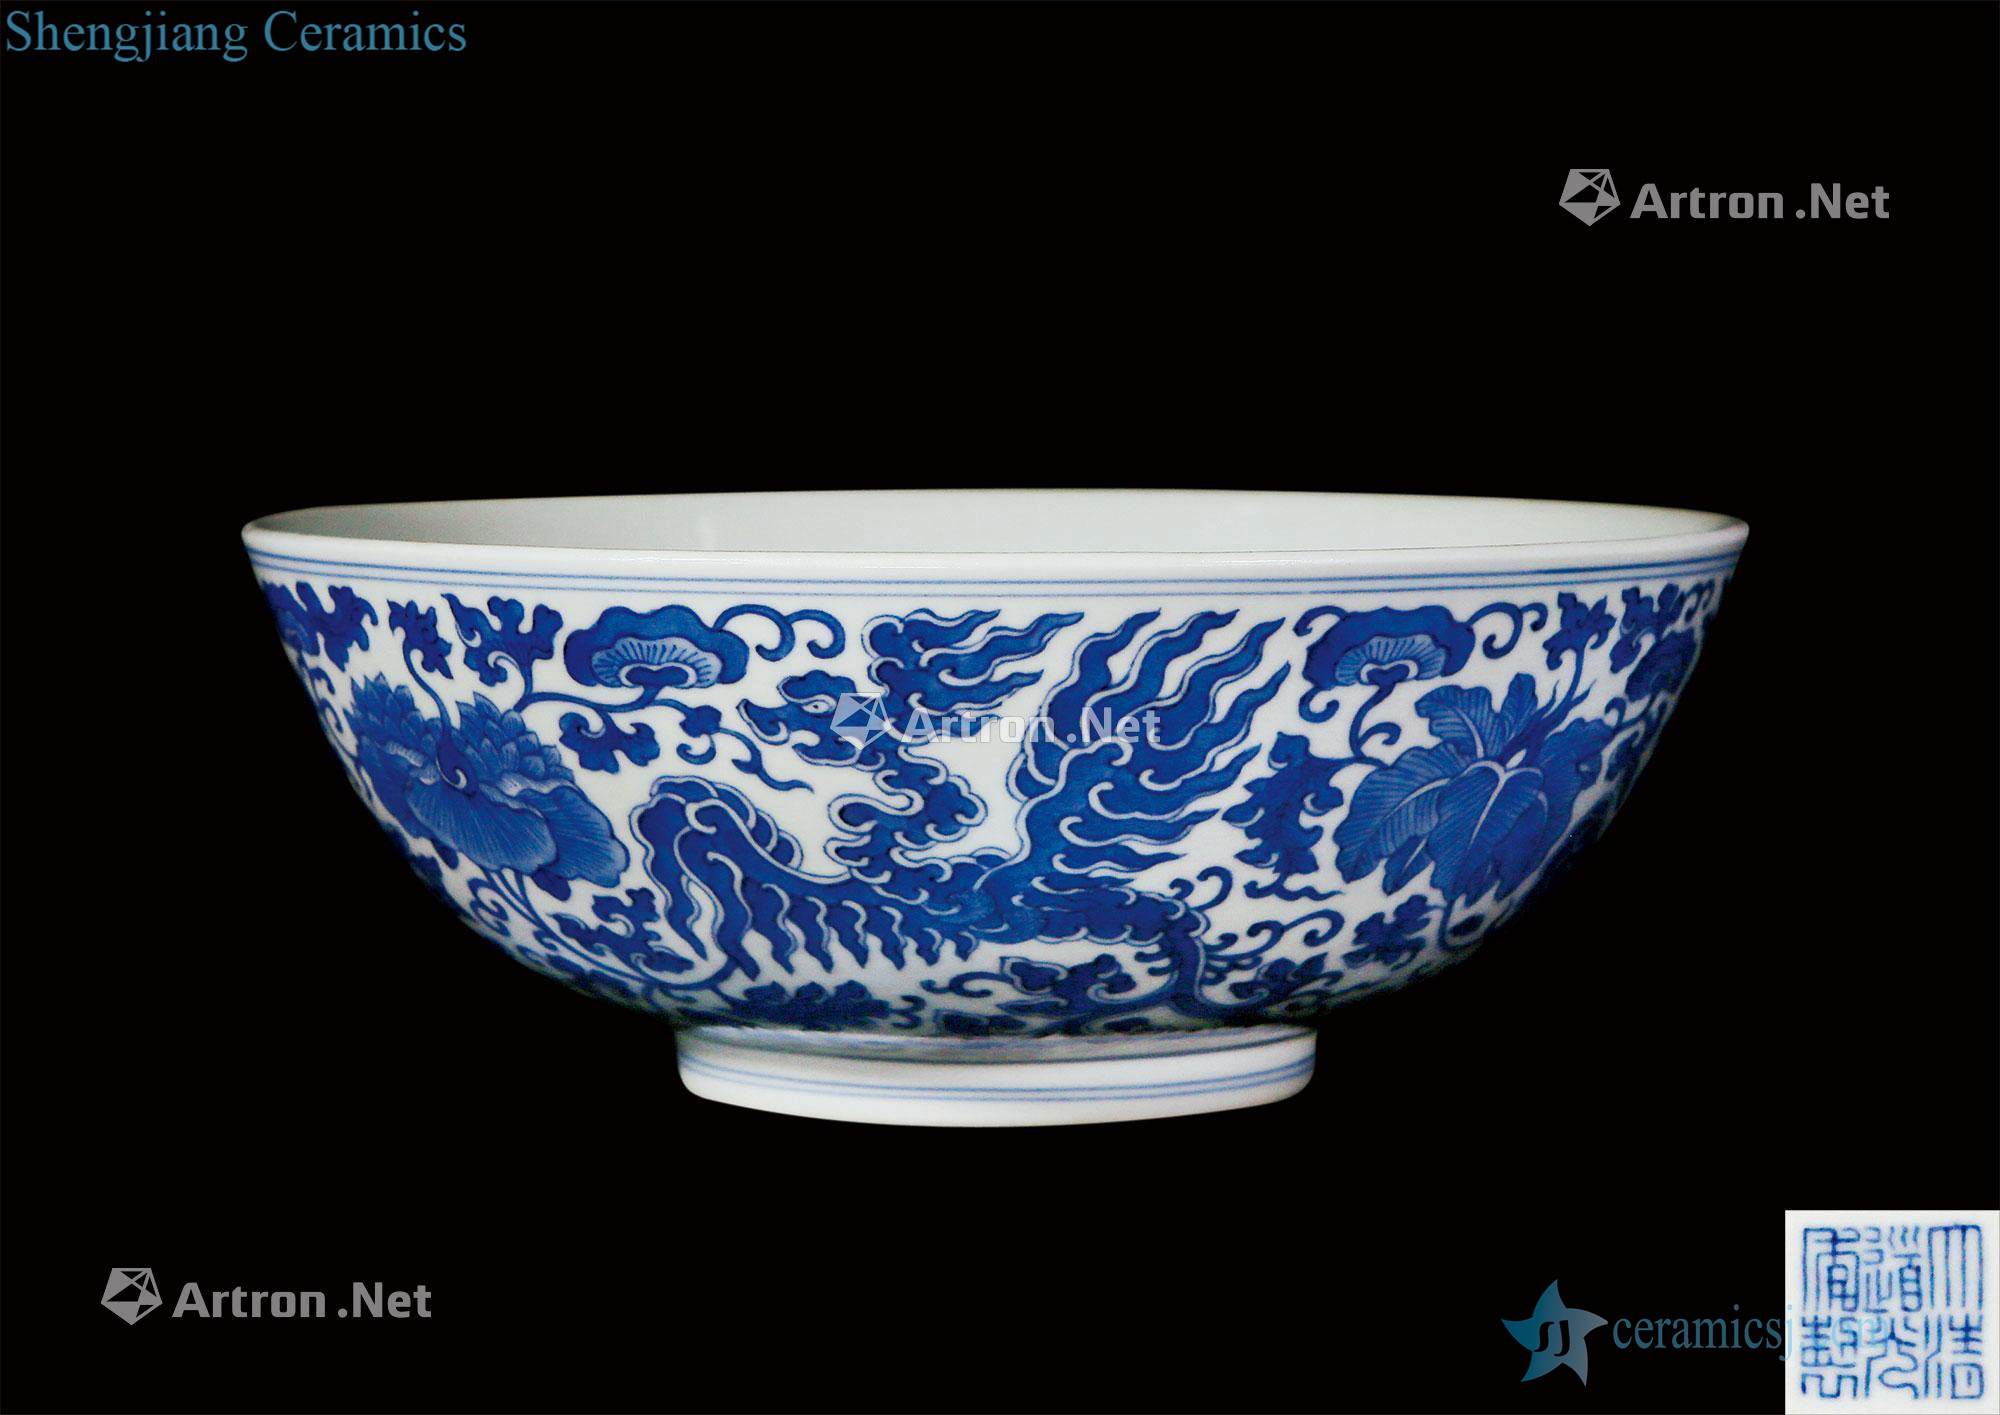 In the qing dynasty Phoenix design blue and white wrist